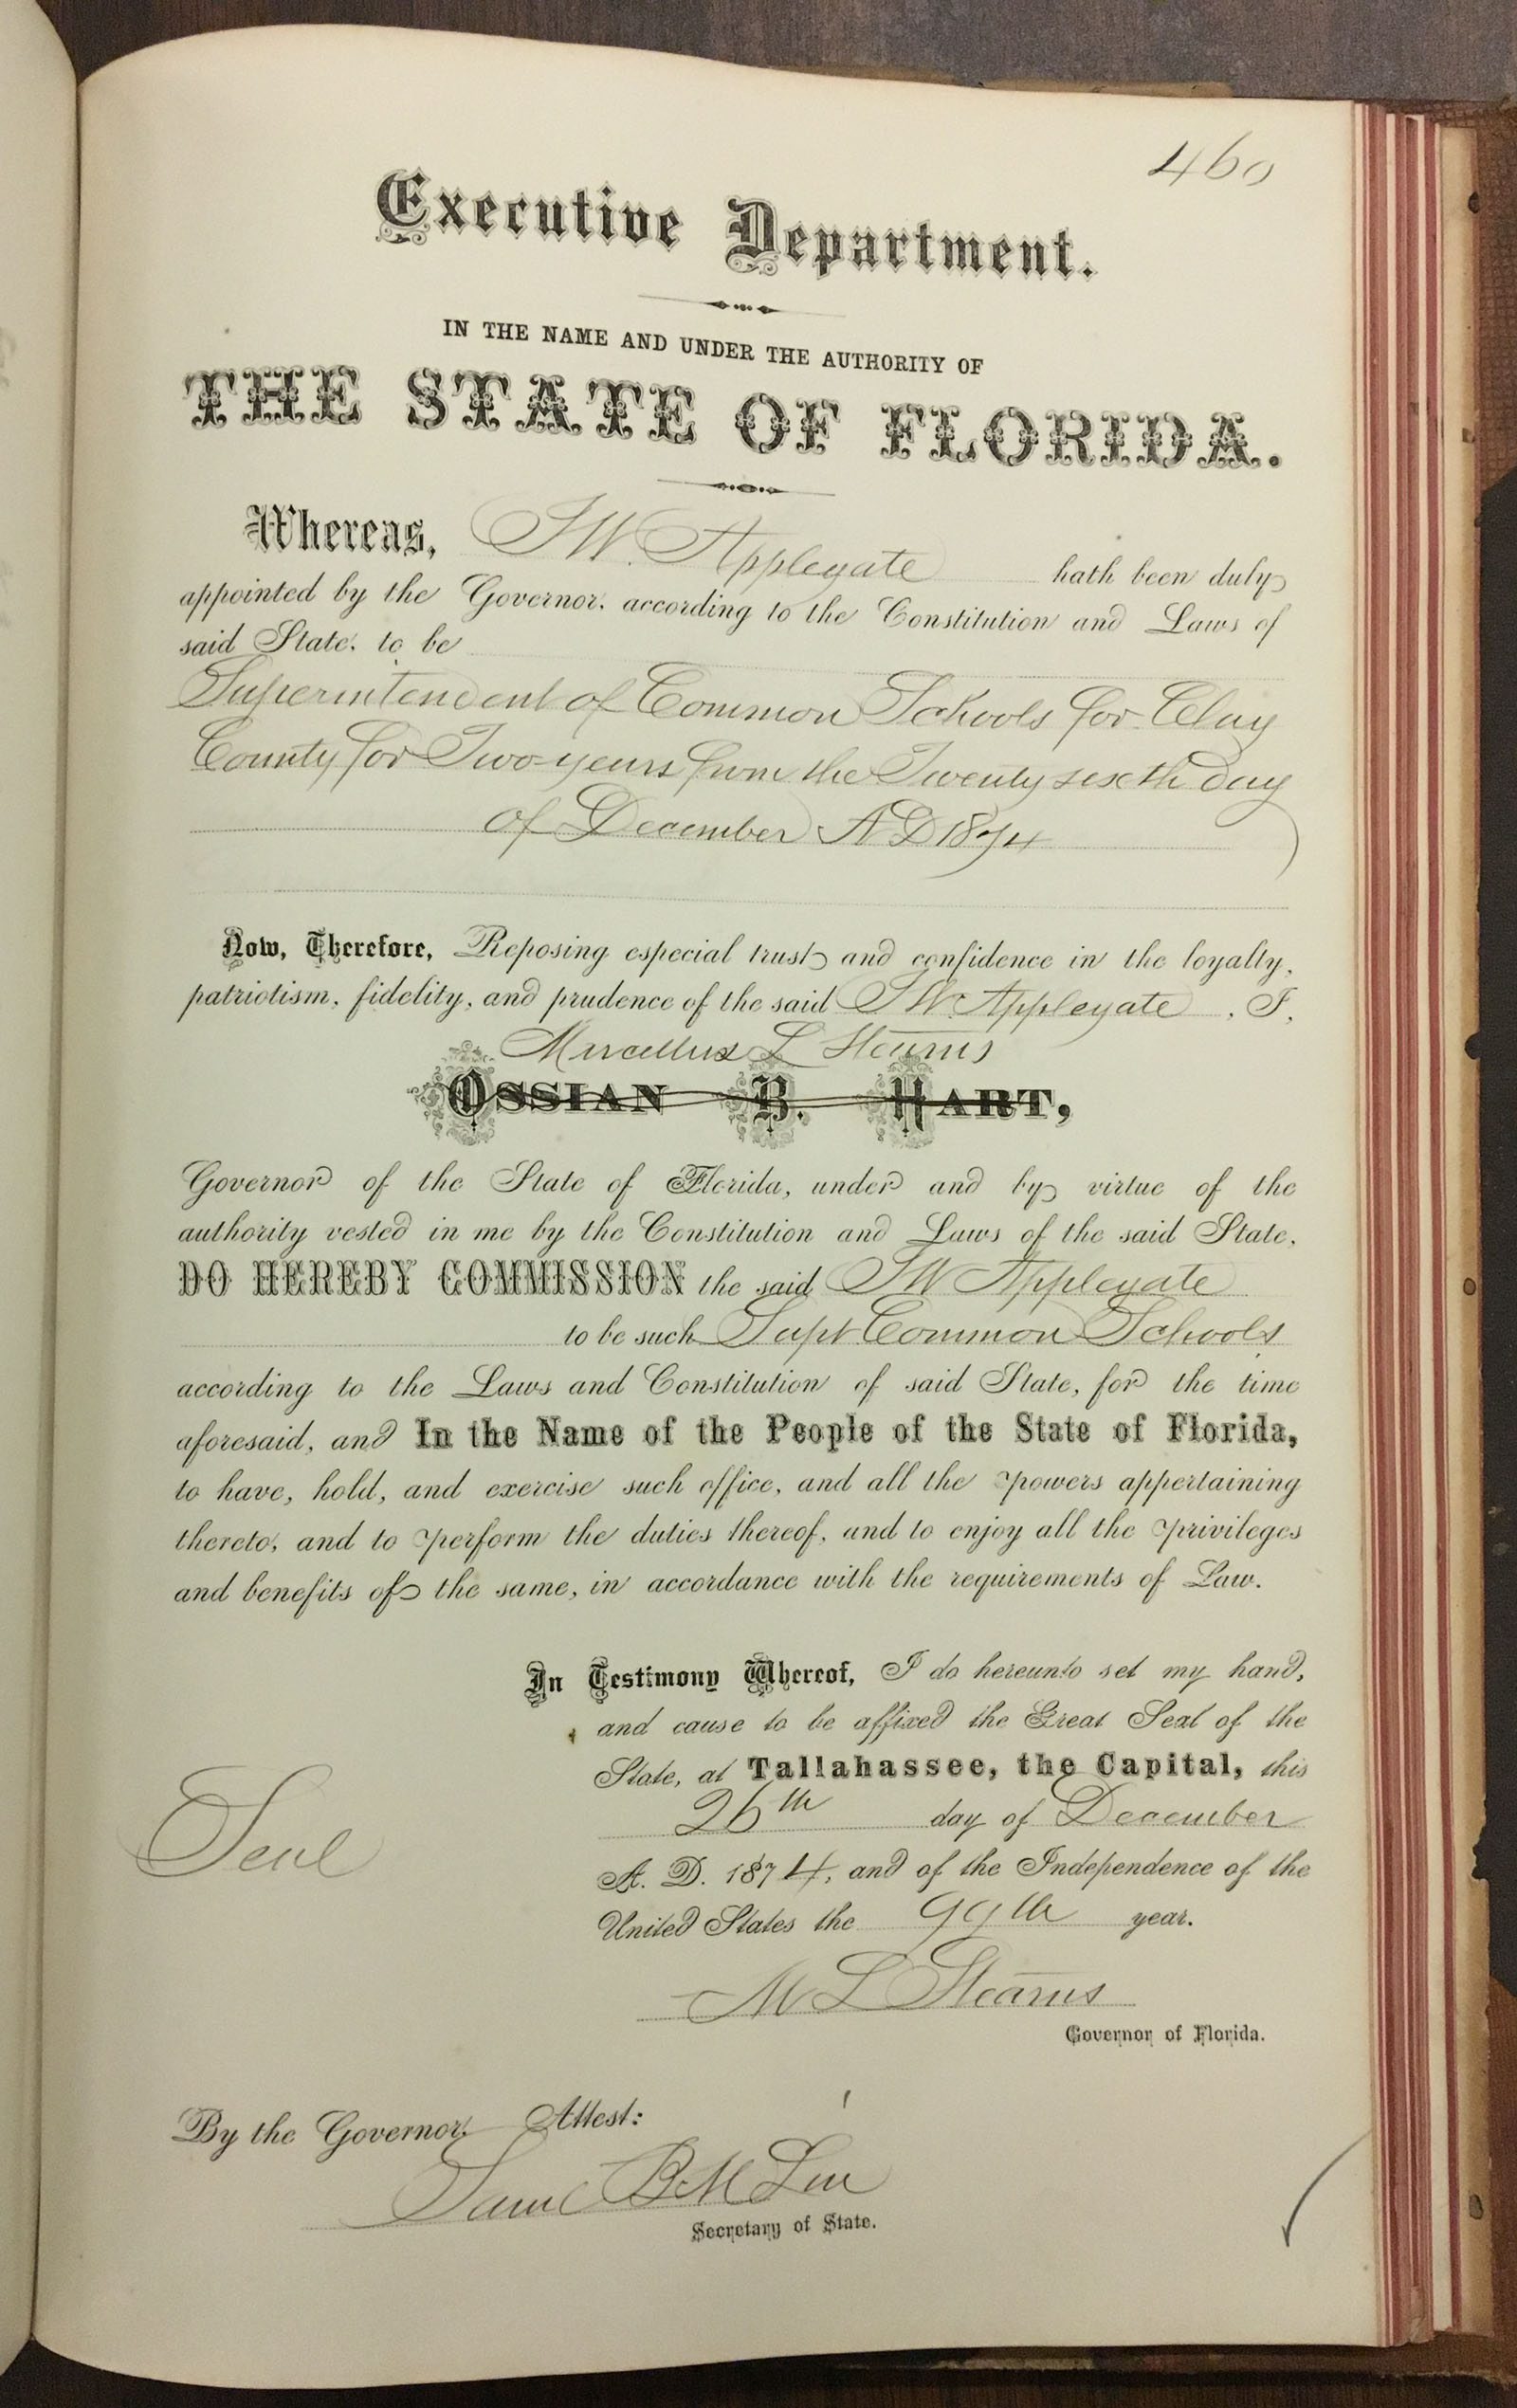 J.W. Applegate's commission as Superintendent of Public Schools for Clay County, in Volume 4 of the Secretary of State's Record of Cmmissions (Series S1285), State Archives of Florida.